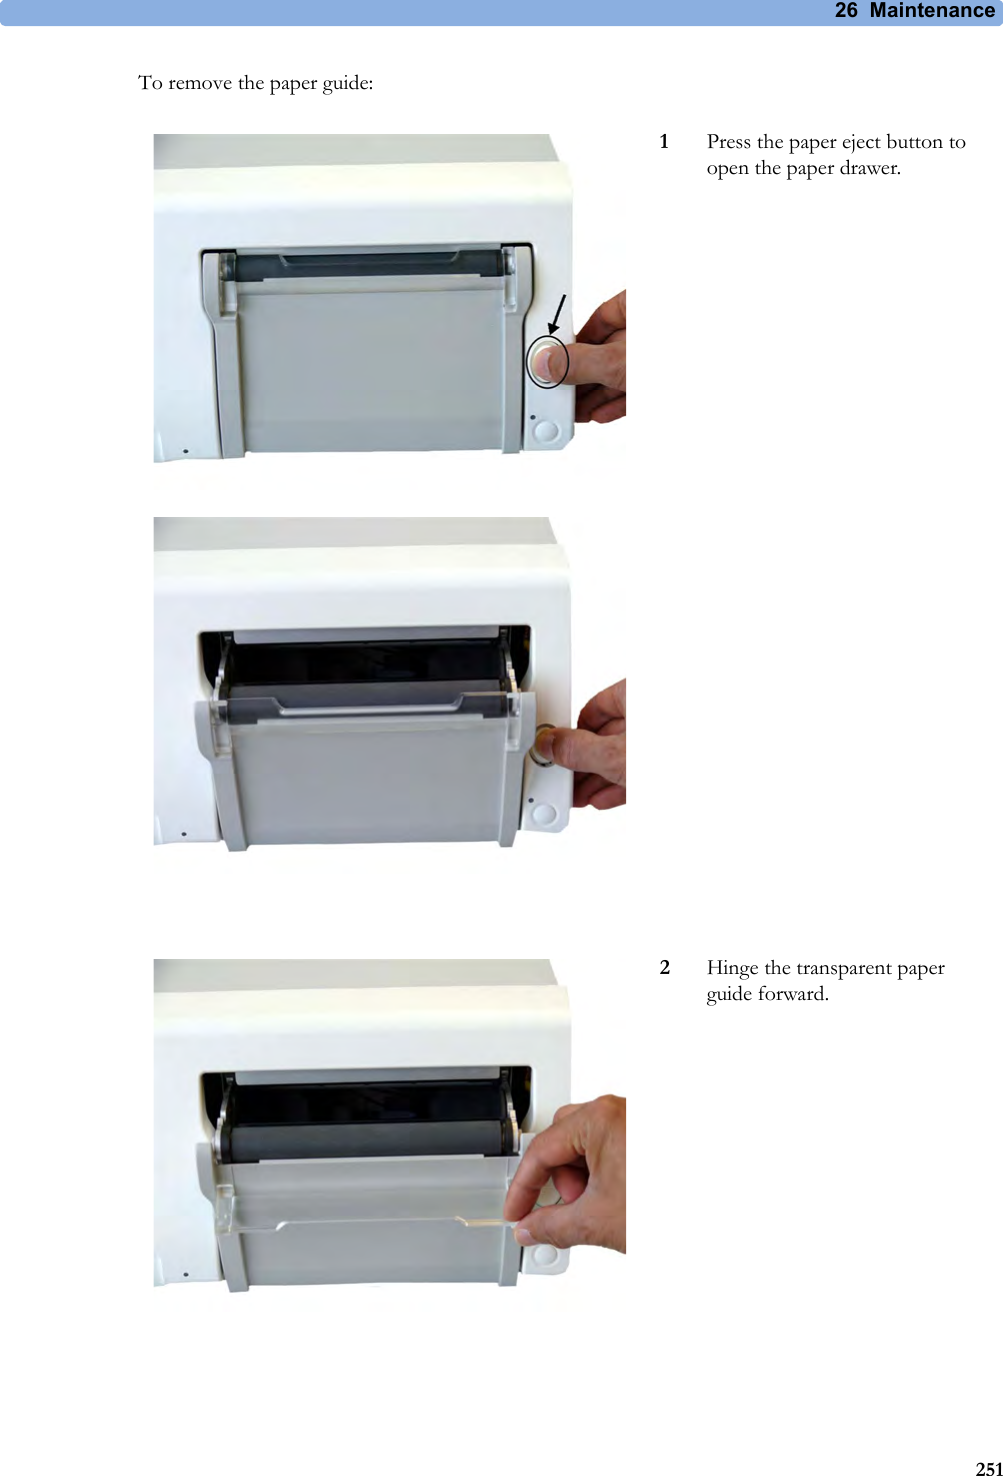 26 Maintenance251To remove the paper guide:1Press the paper eject button to open the paper drawer.2Hinge the transparent paper guide forward.